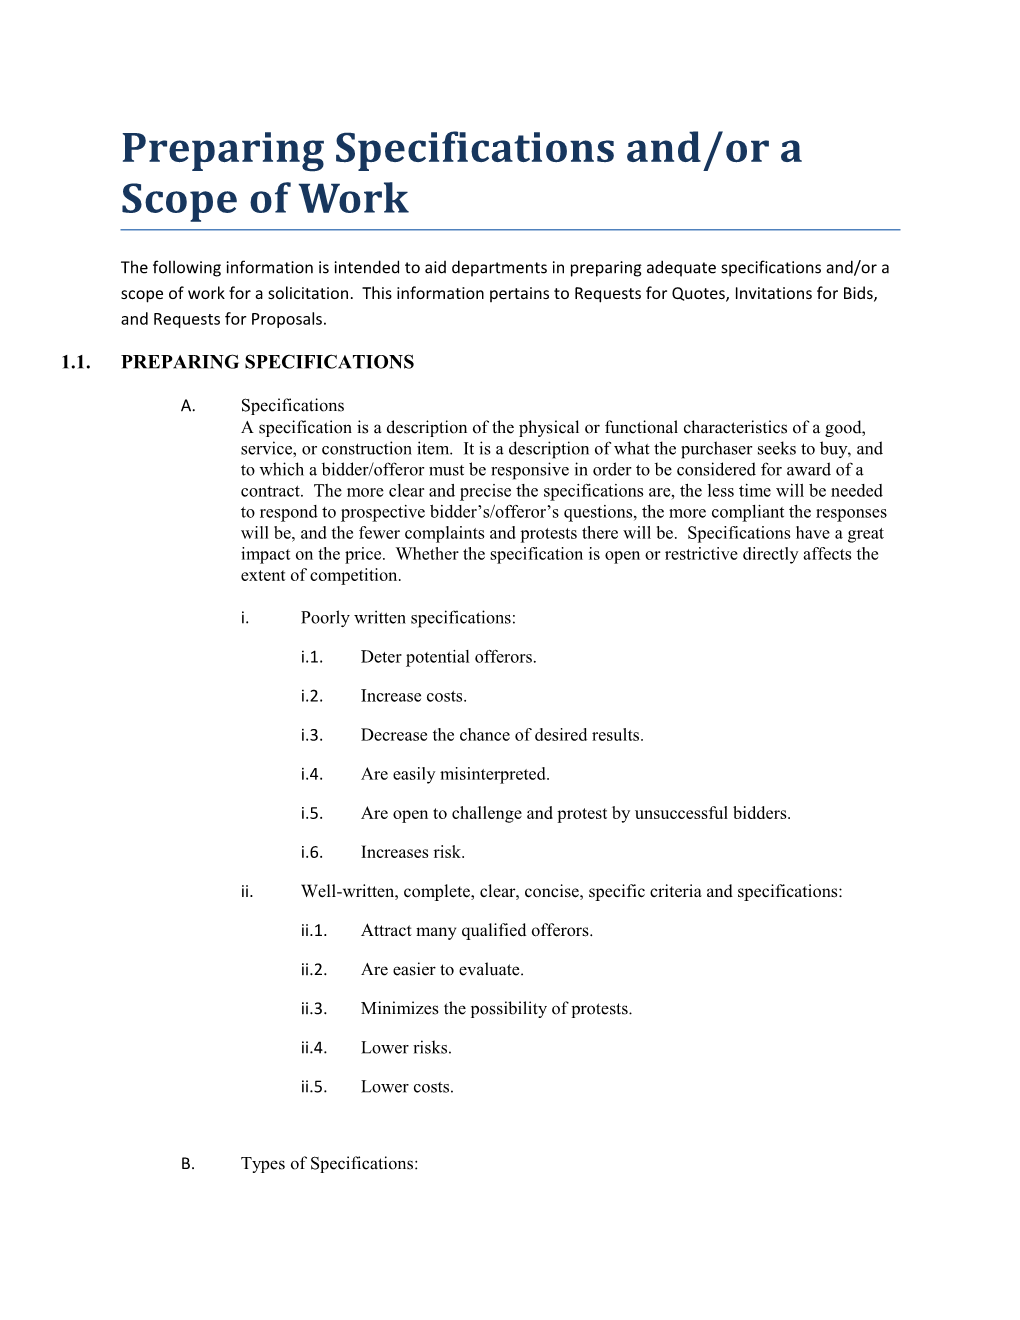 Preparing Specifications and Scope of Work